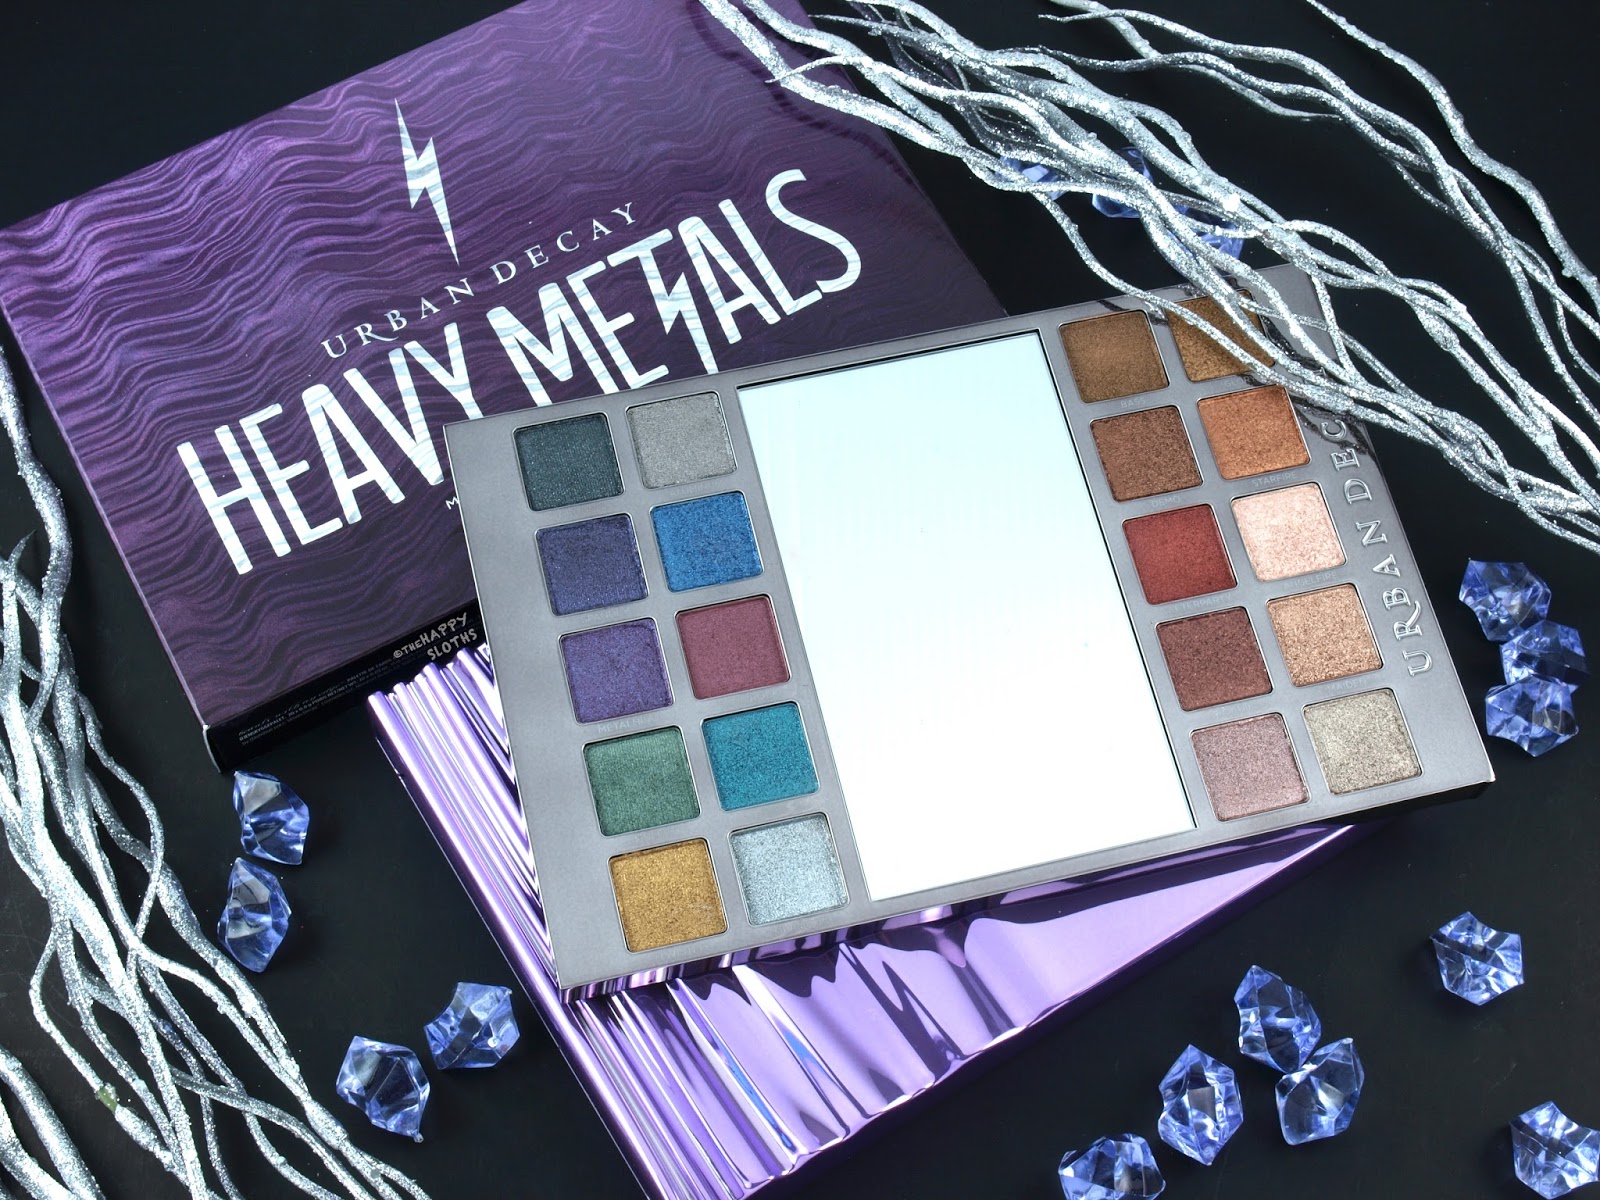 Urban Decay Heavy Metals Metallic Eyeshadow Palette: Review and Swatches